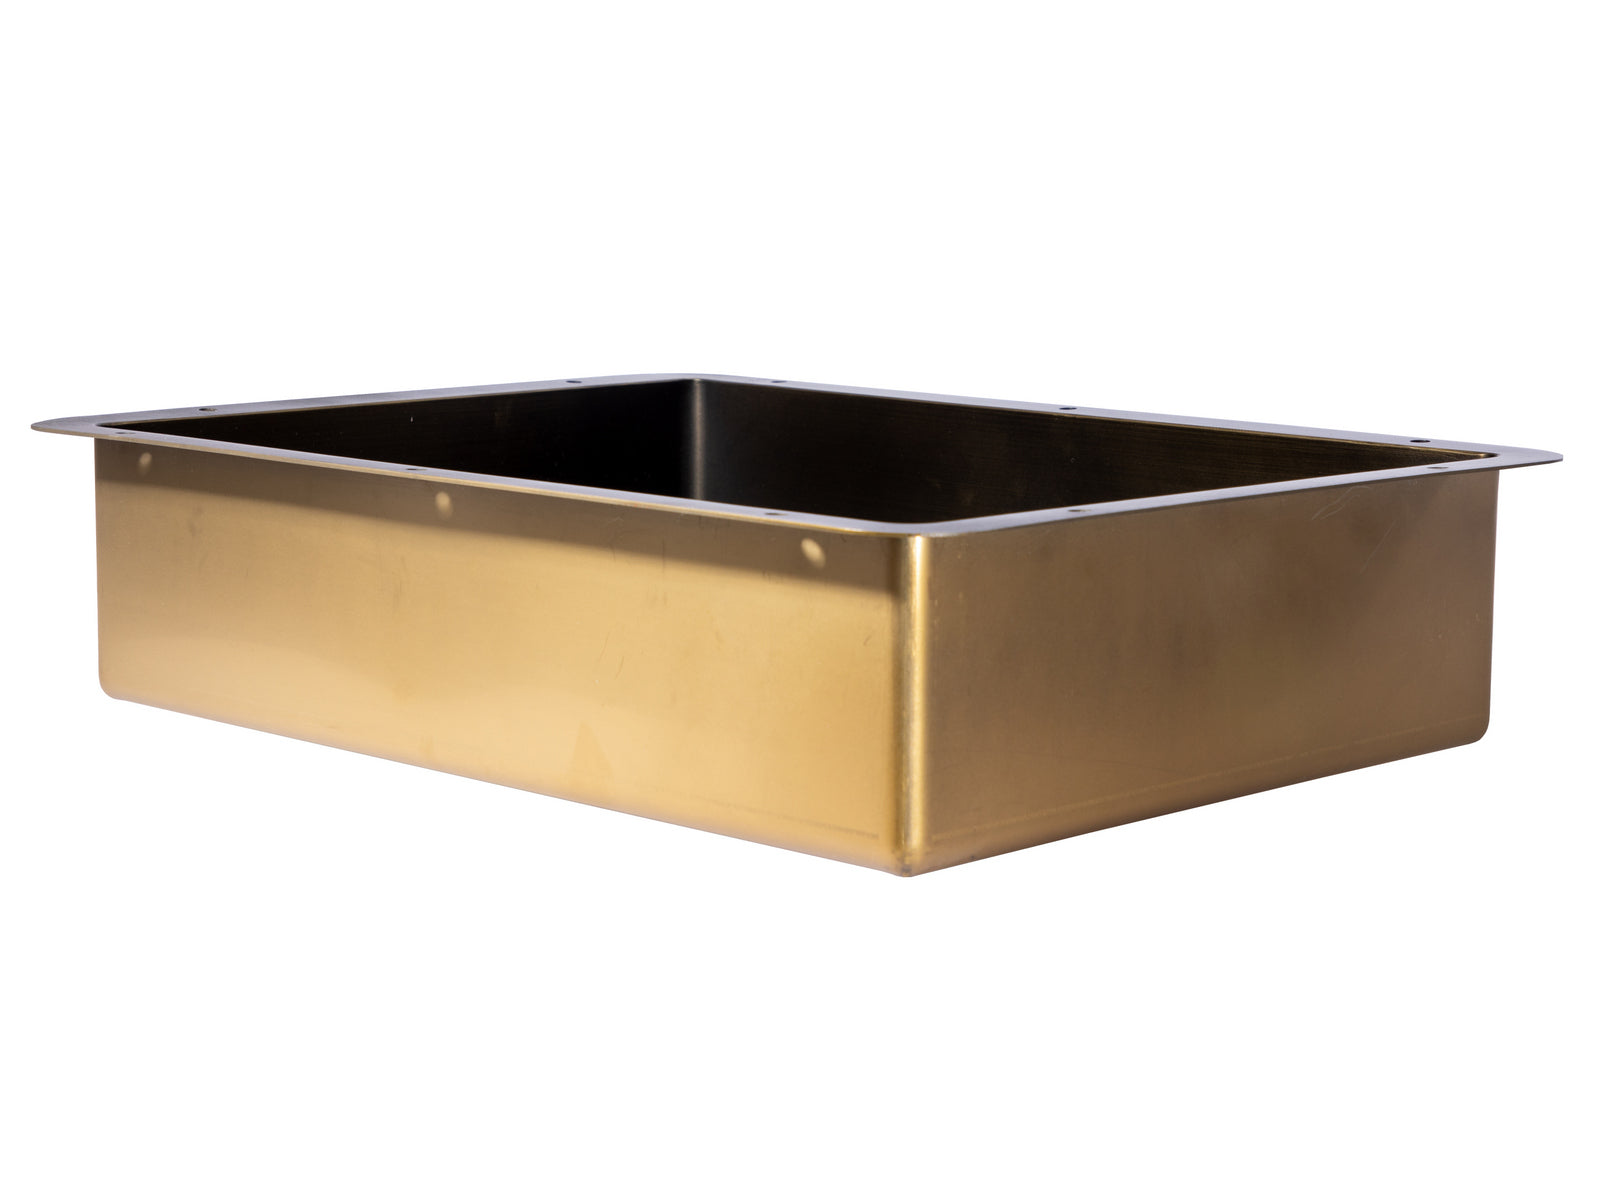 Rectangular 20' x 16" Undermount Stainless Steel Bathroom Sink and Drain in Antique Gold